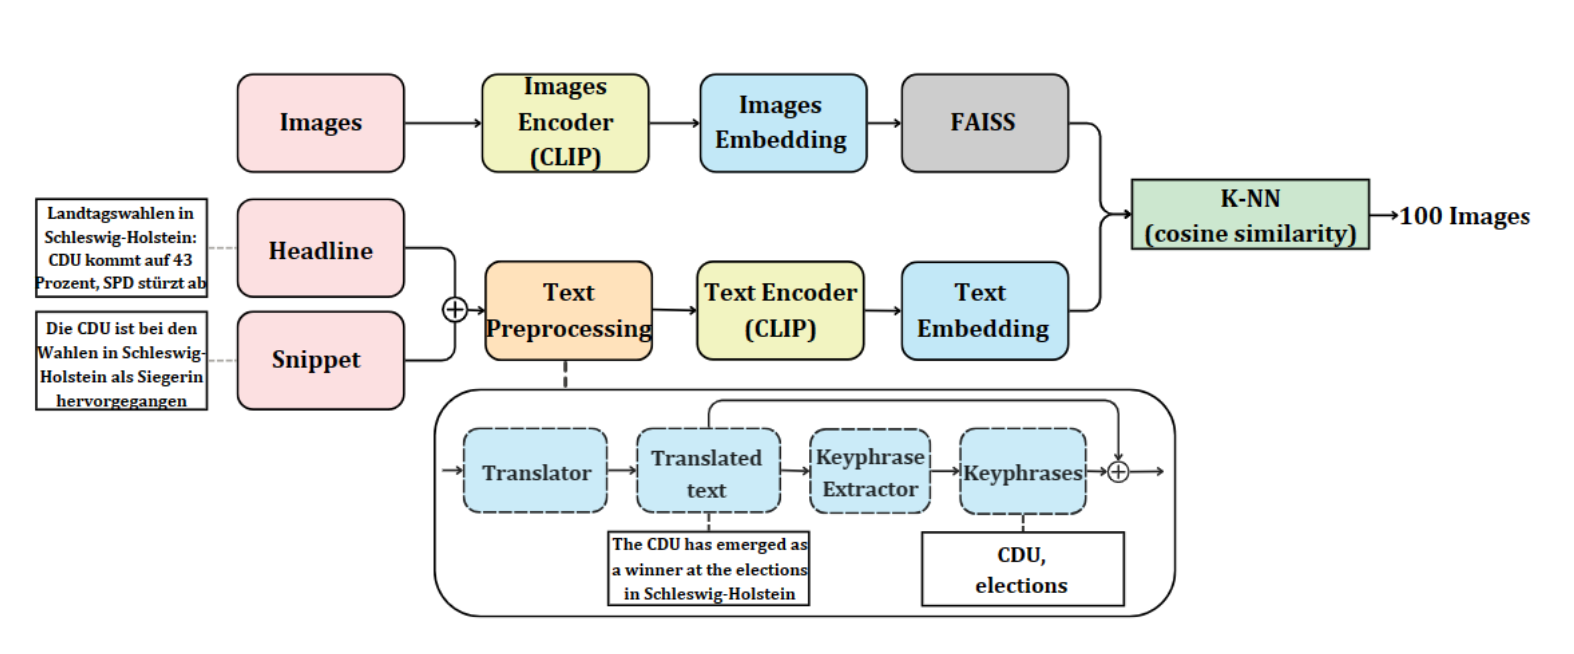 Multimodal Fusion in NewsImages 2023: Evaluating Translators, Keyphrase Extraction, and CLIP Pre-Training